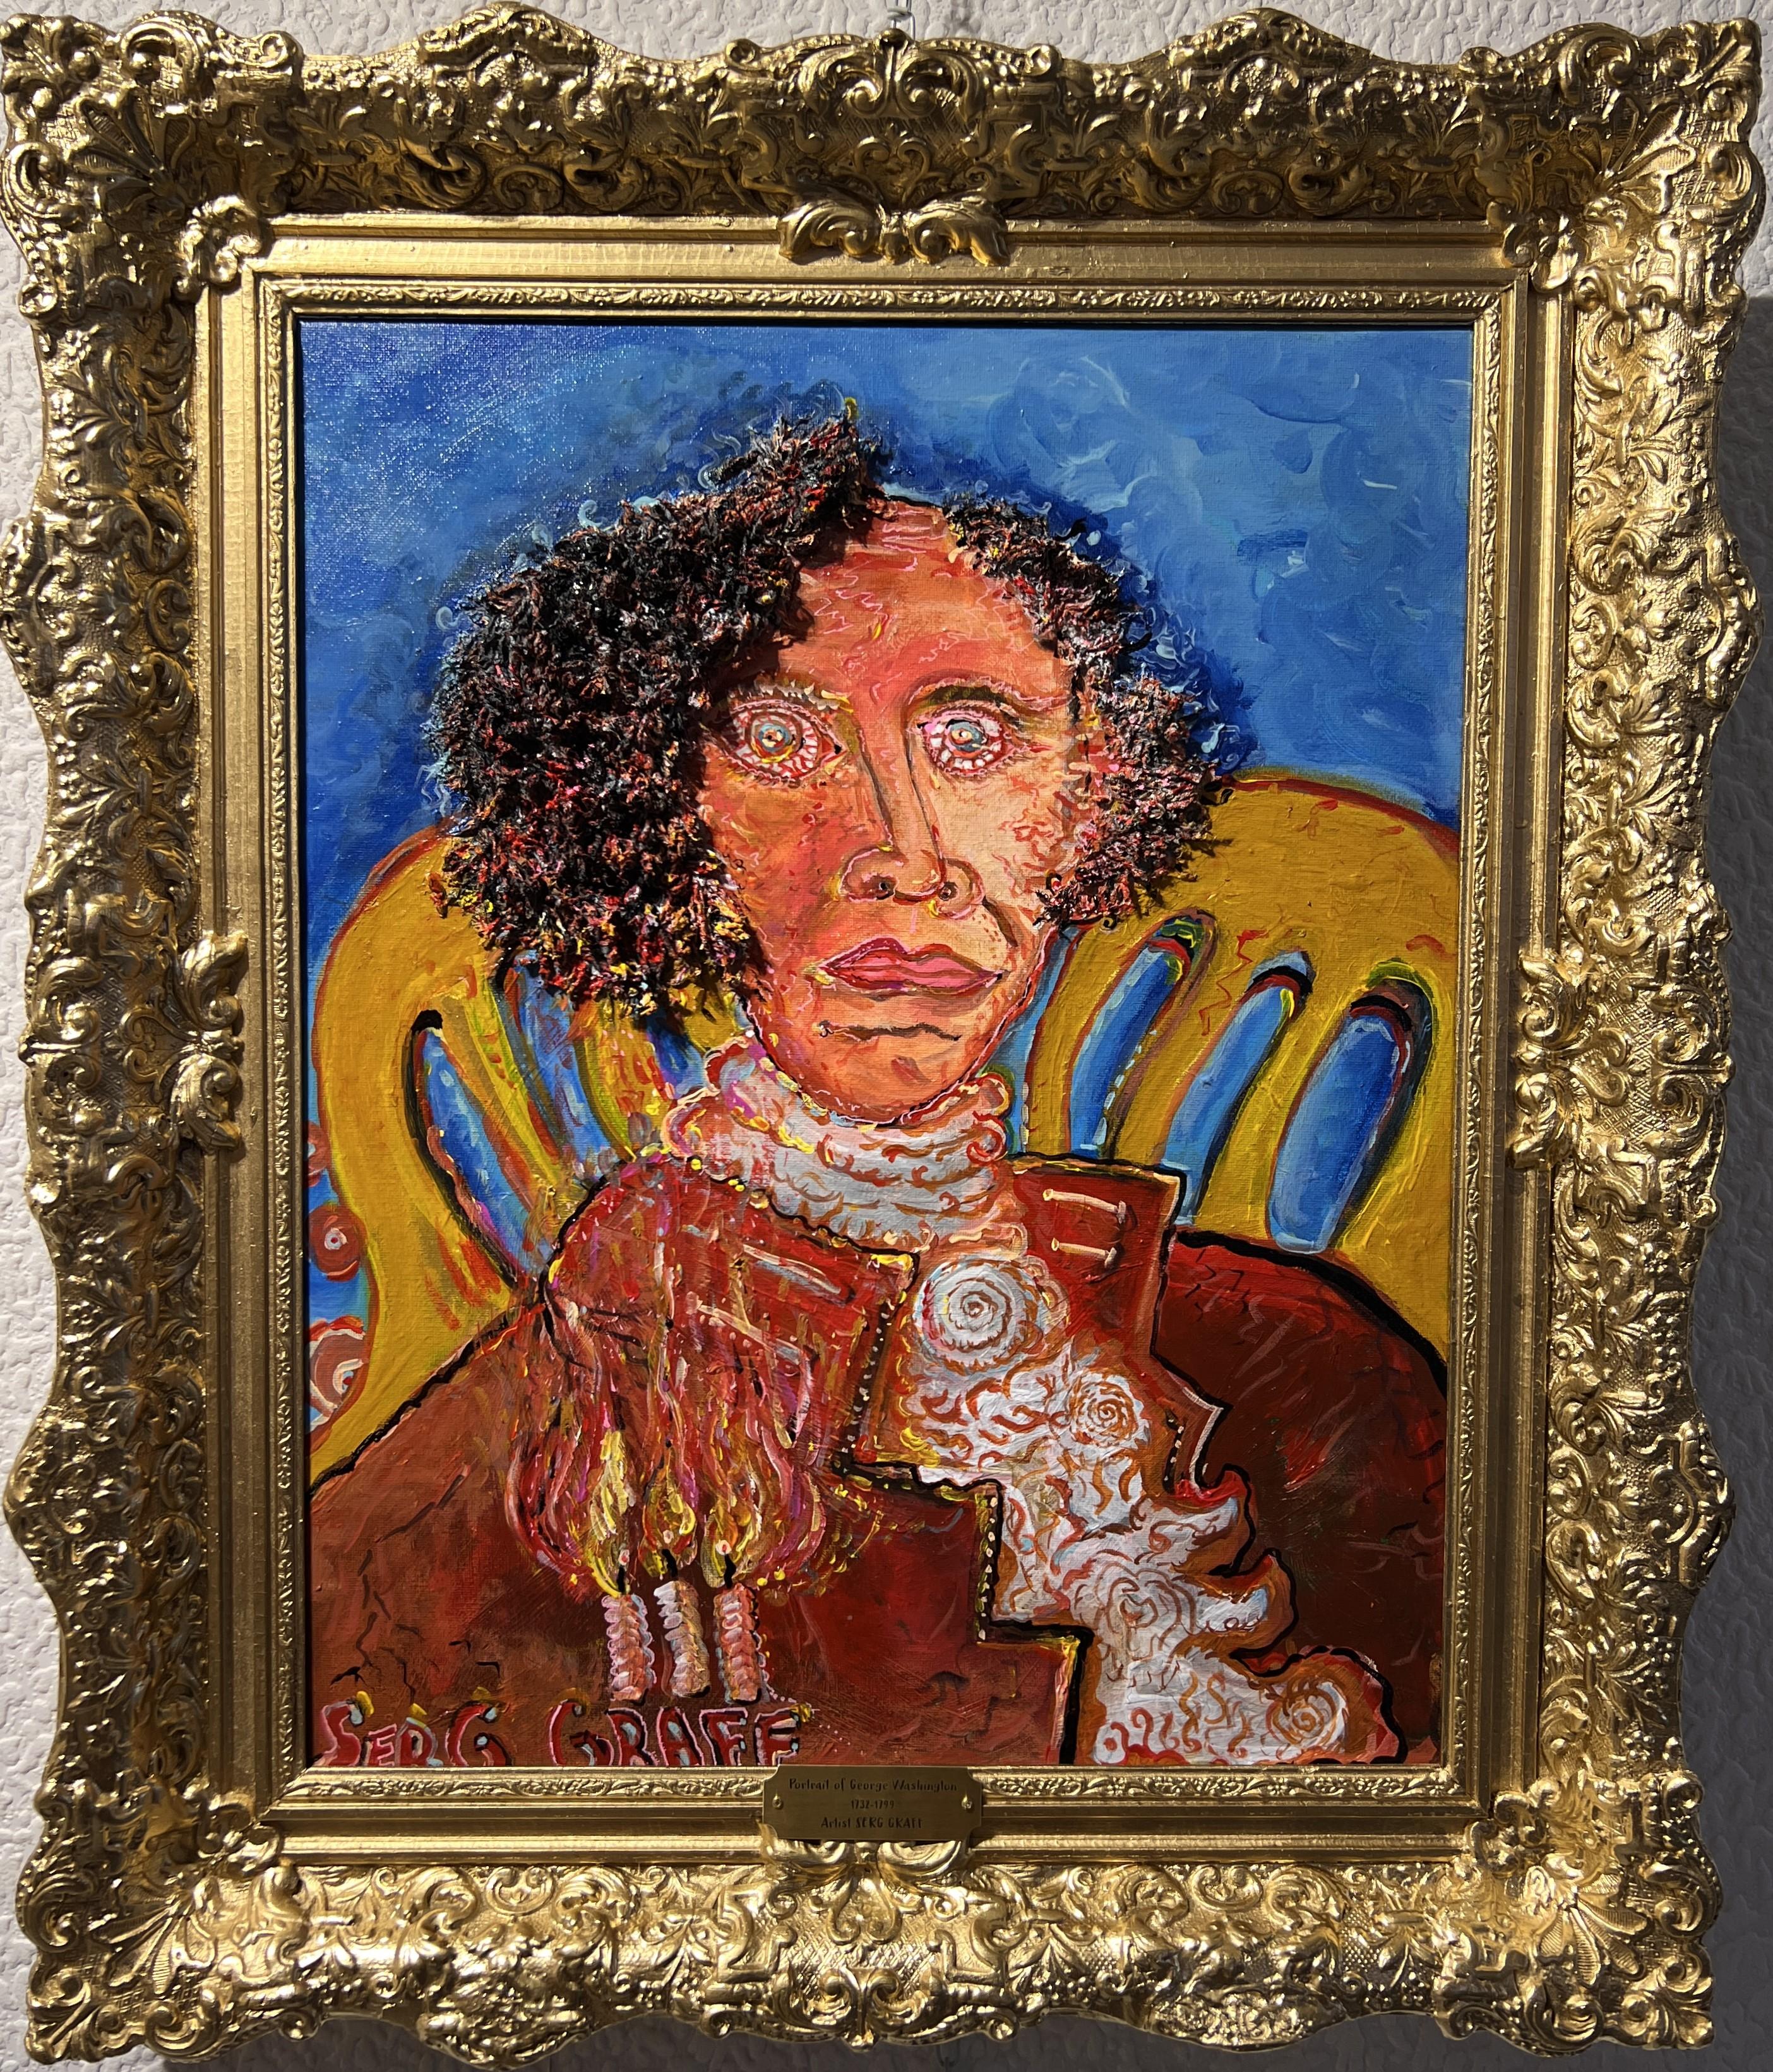 This is a rare unique original acrylic/mixed media painting on canvas in a naïve primitivism style depicting George Washington (1732-1799) - the Founding Father of the United States. 

 Present in an ornate gilt frame. Excellent condition. Framed